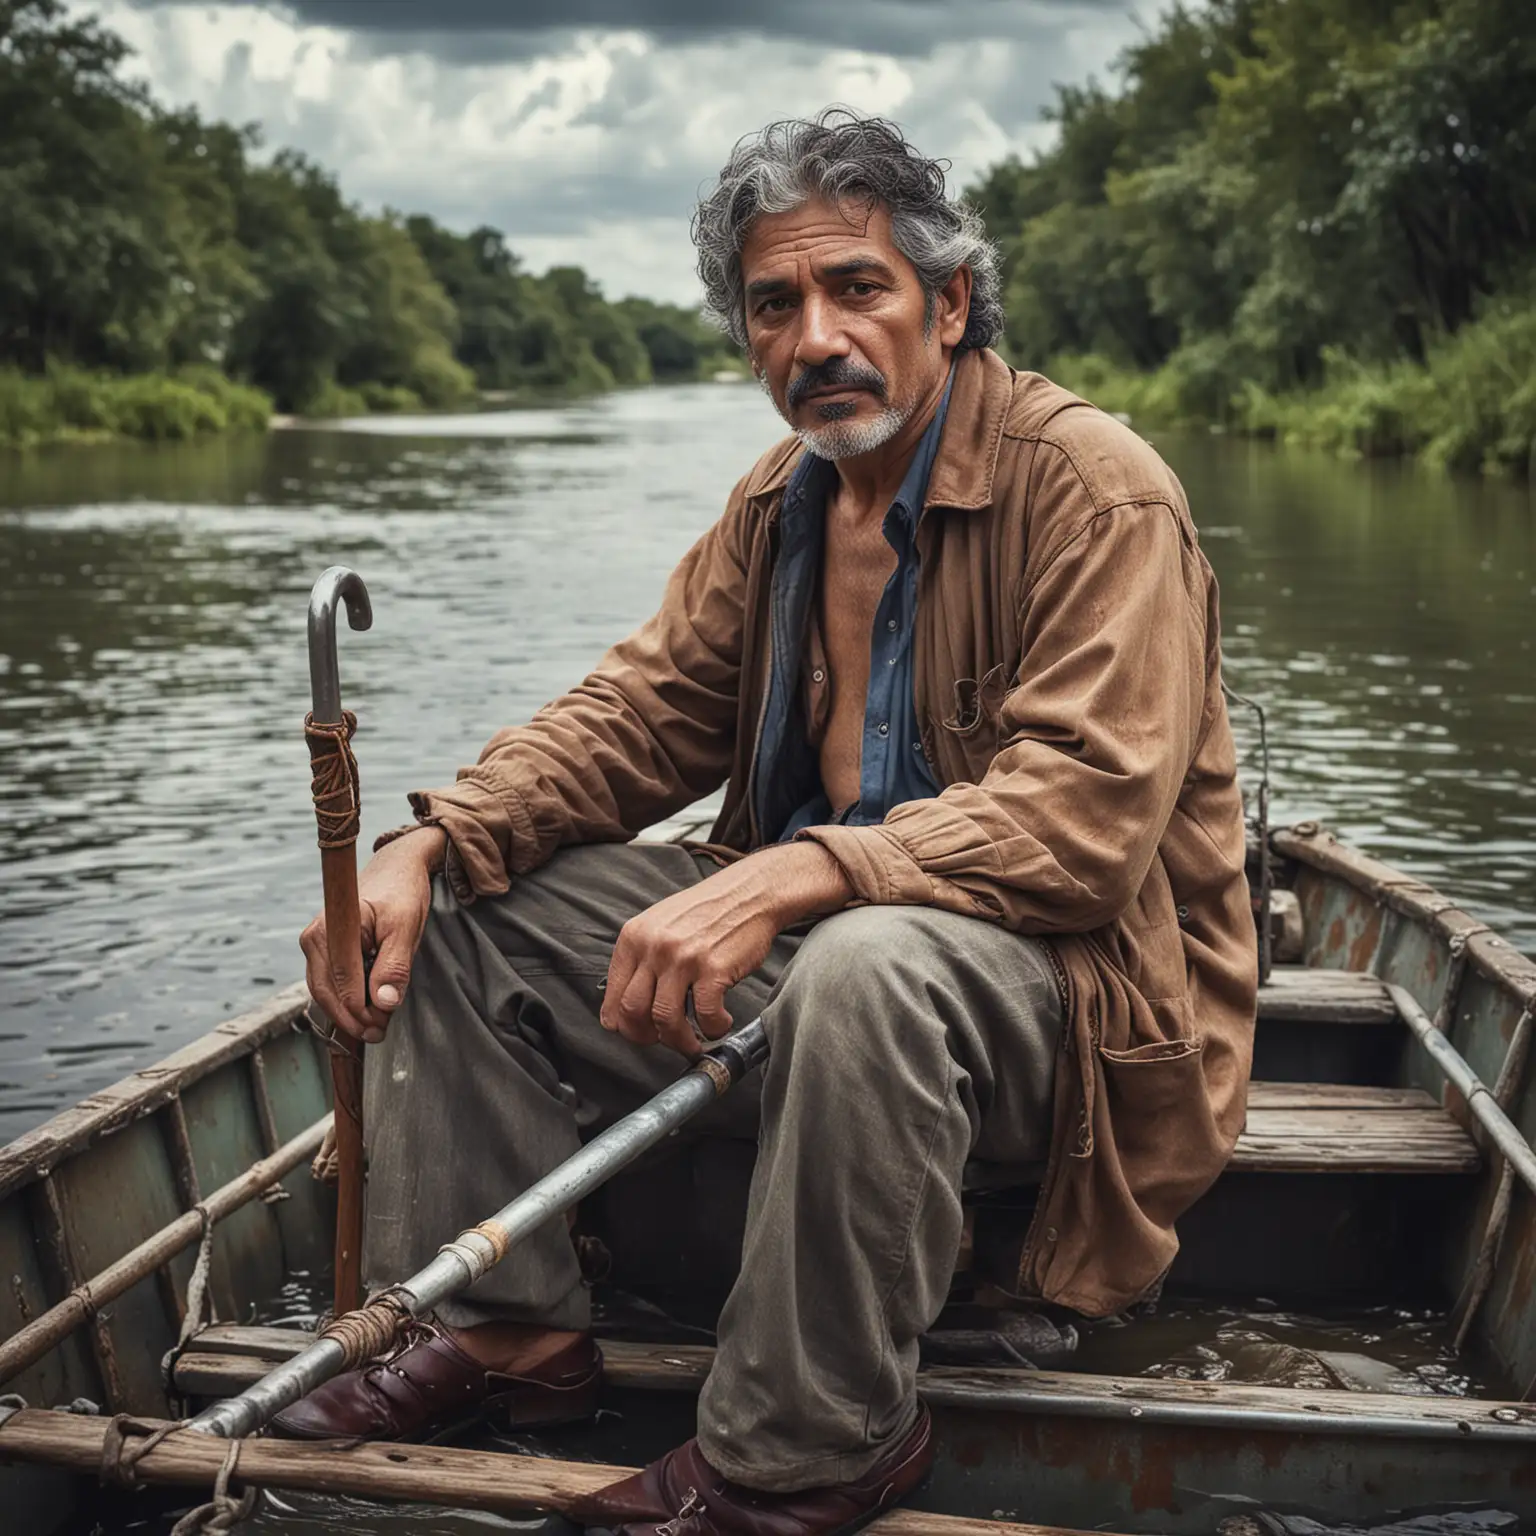 a poor looking middle age hispanic man in old clothes with a metal walking cane resting across his lap as he sits in a metal motor boat on a river on a cloudy day, vibrant colors